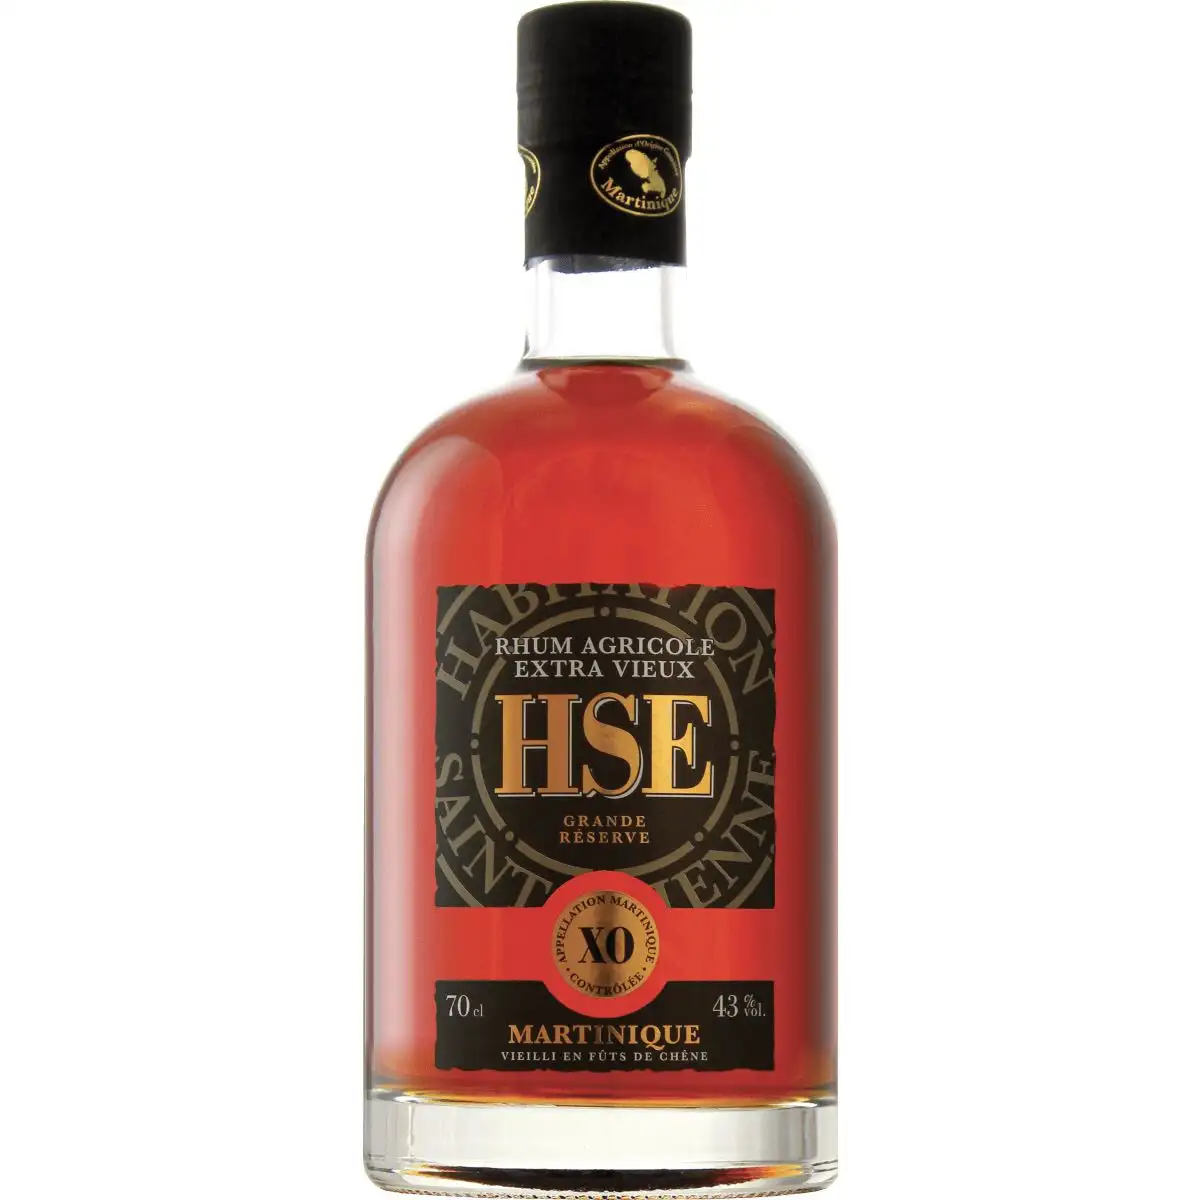 Image of the front of the bottle of the rum HSE Grande Reserve XO